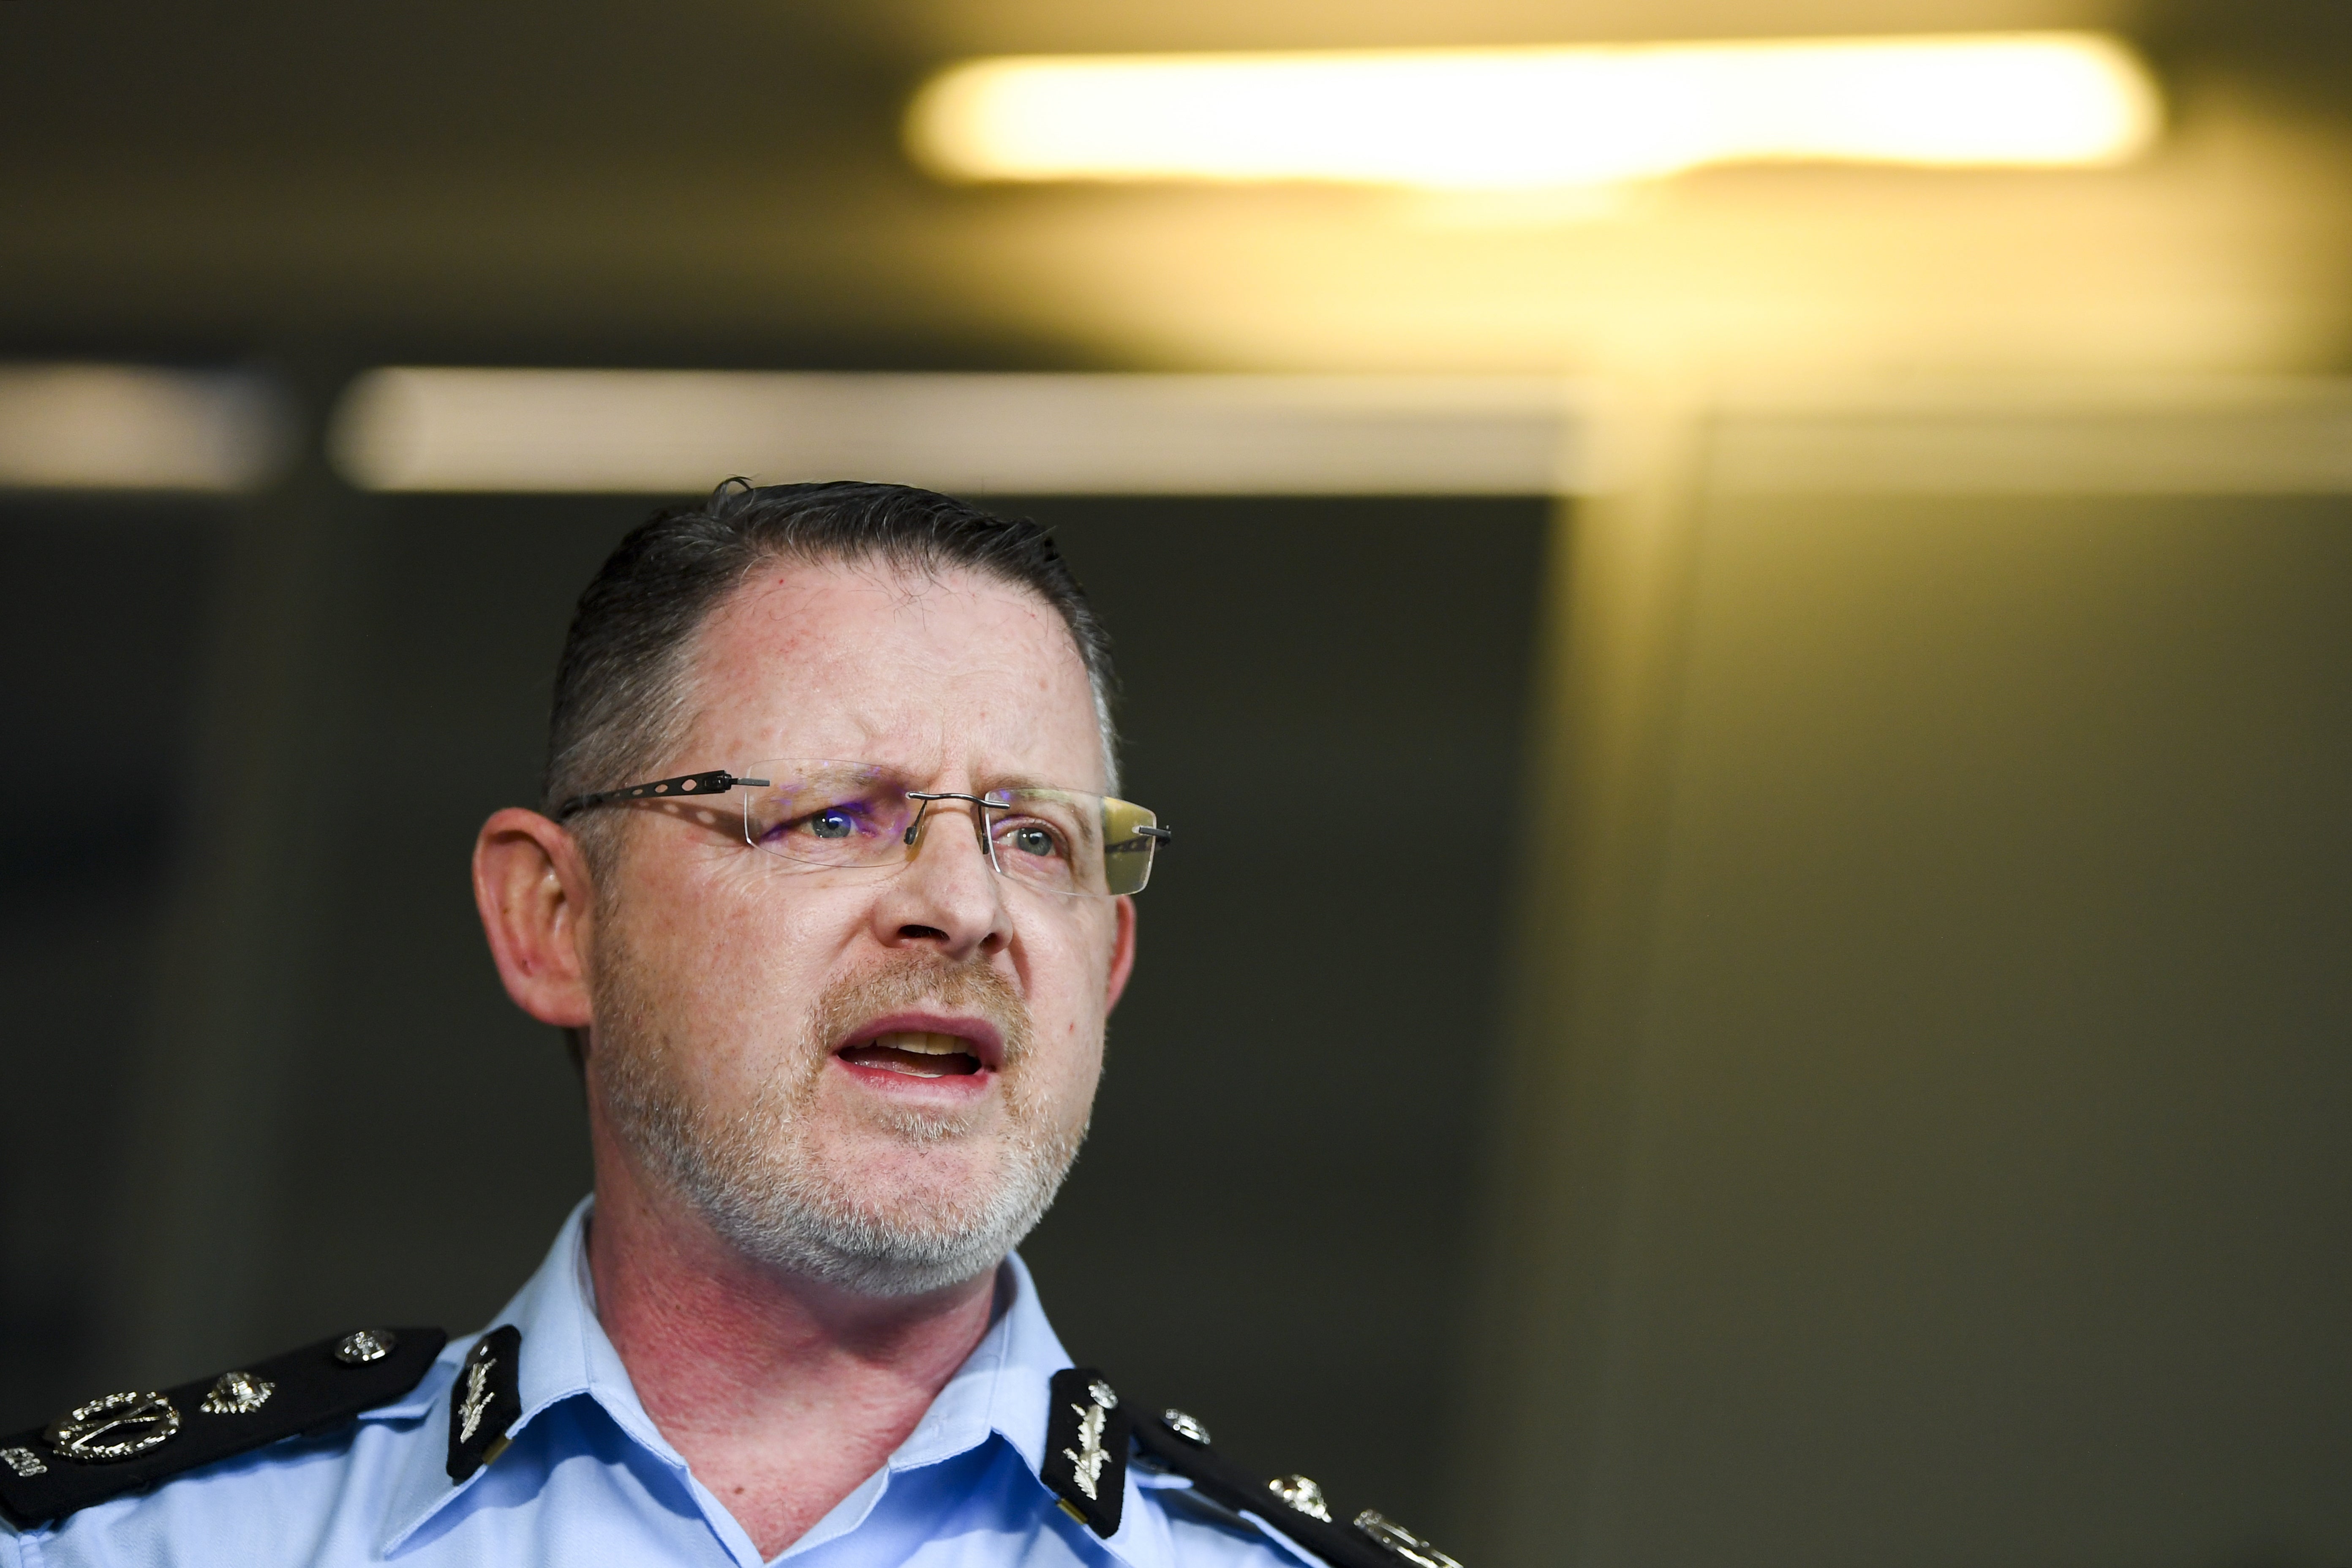 Australian Federal Police Assistant Commissioner Nigel Ryan speaks to the media during a press conference in Canberra, Australia on 7 December 2021